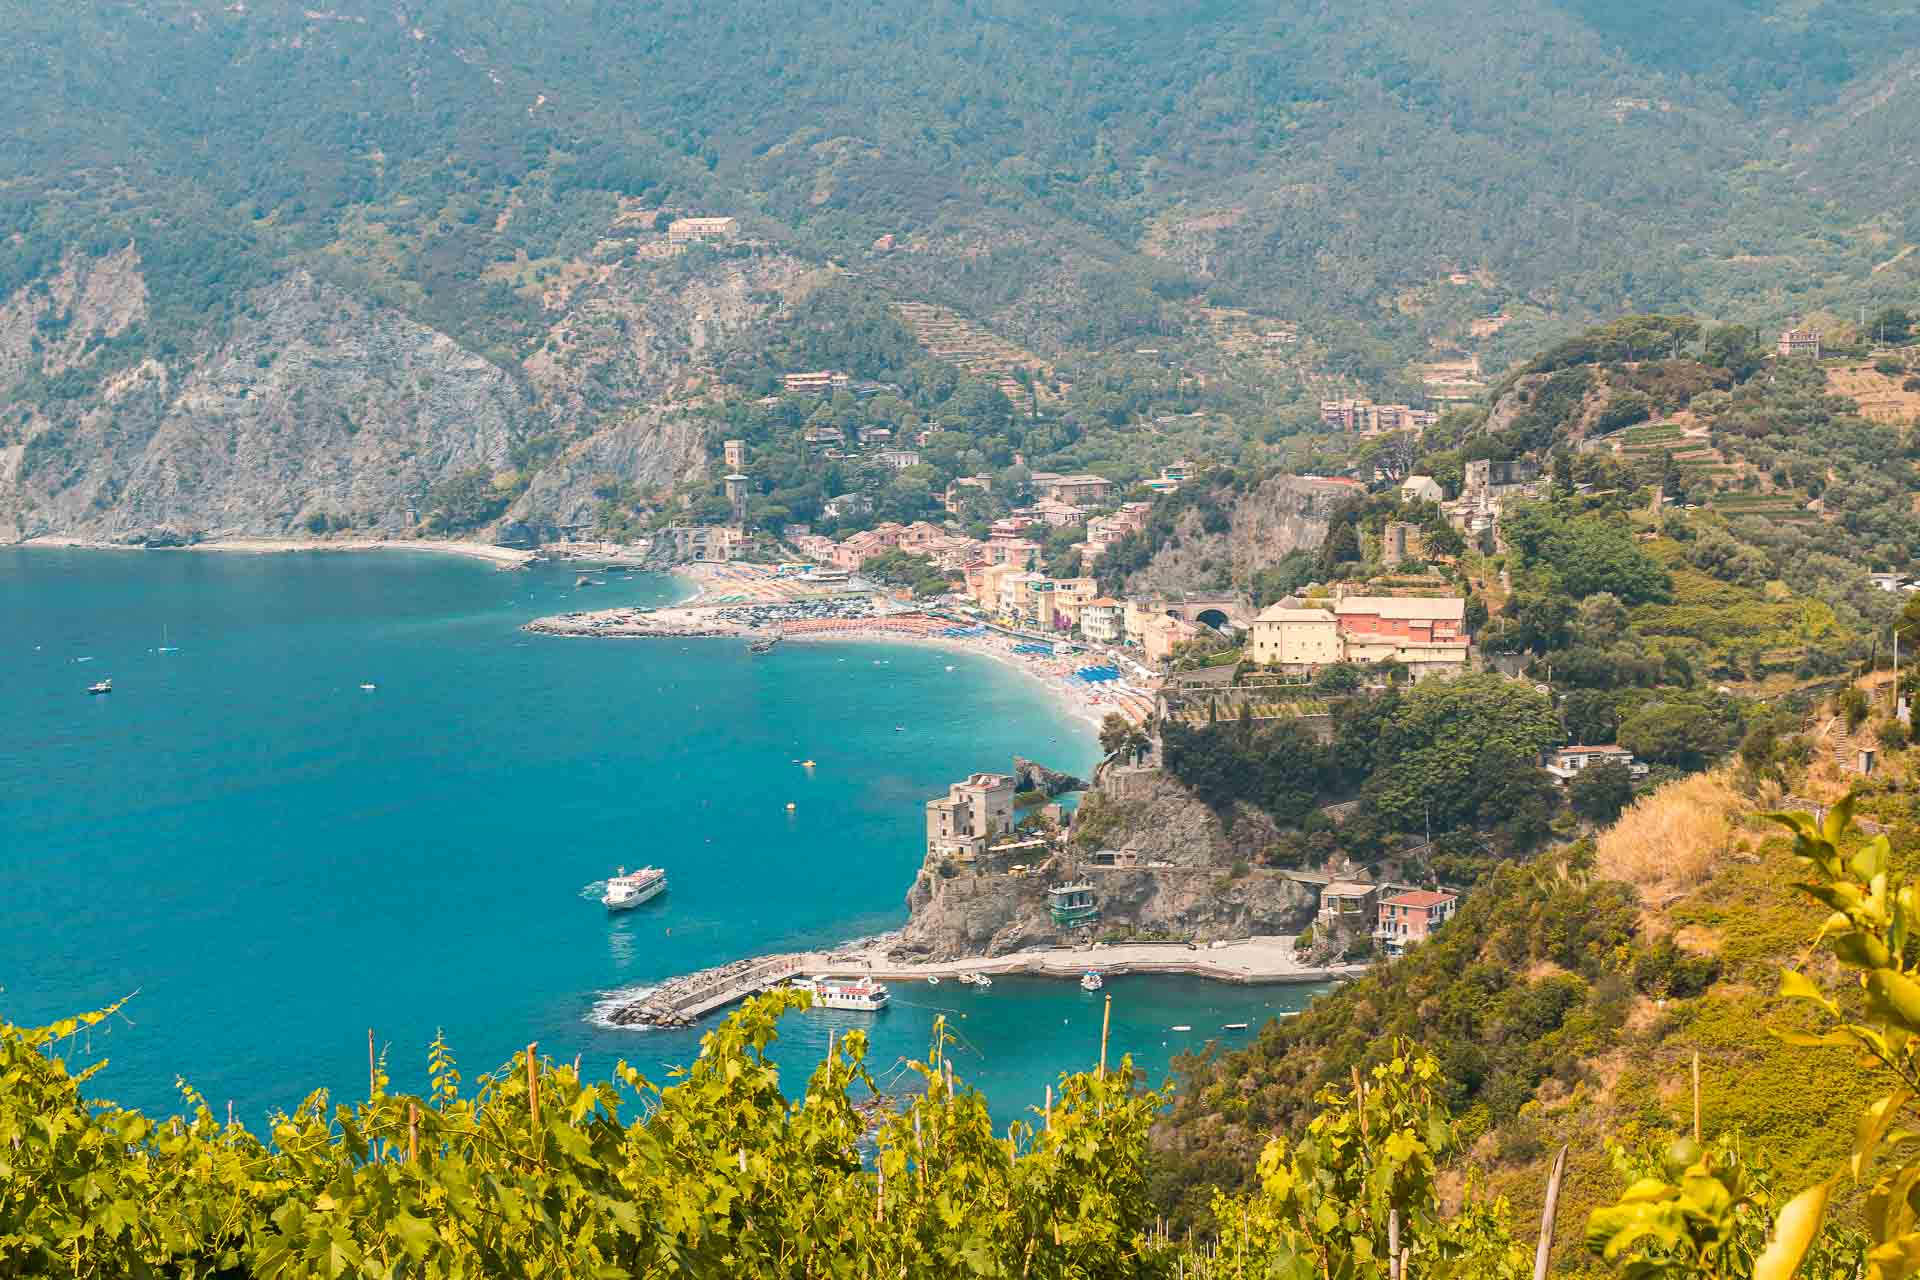 Overview of the Cinque Terre from above showing a beach in between mountains